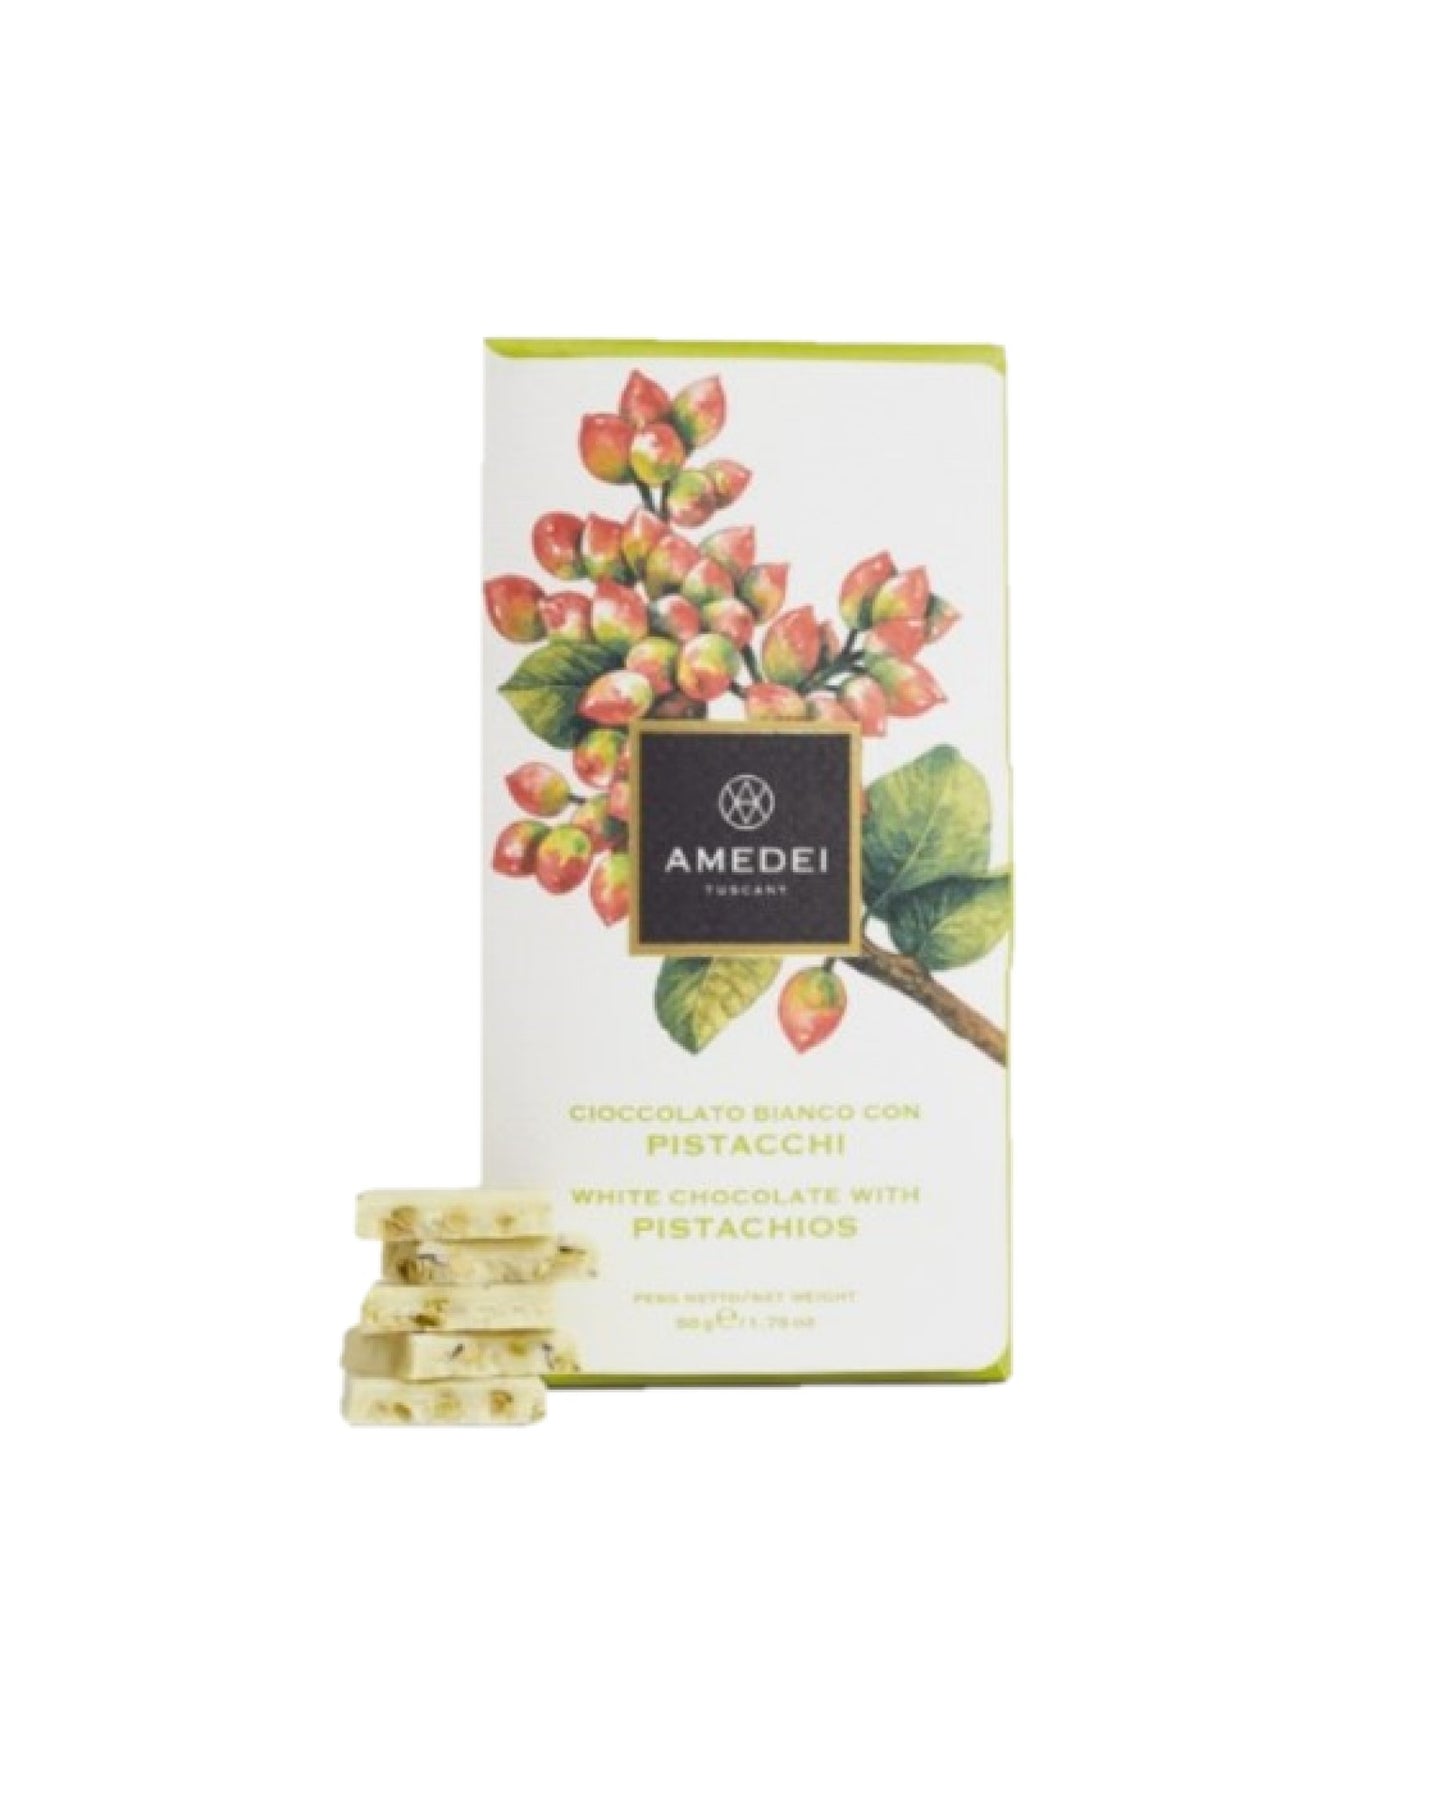 White chocolate with pistachios (50g)